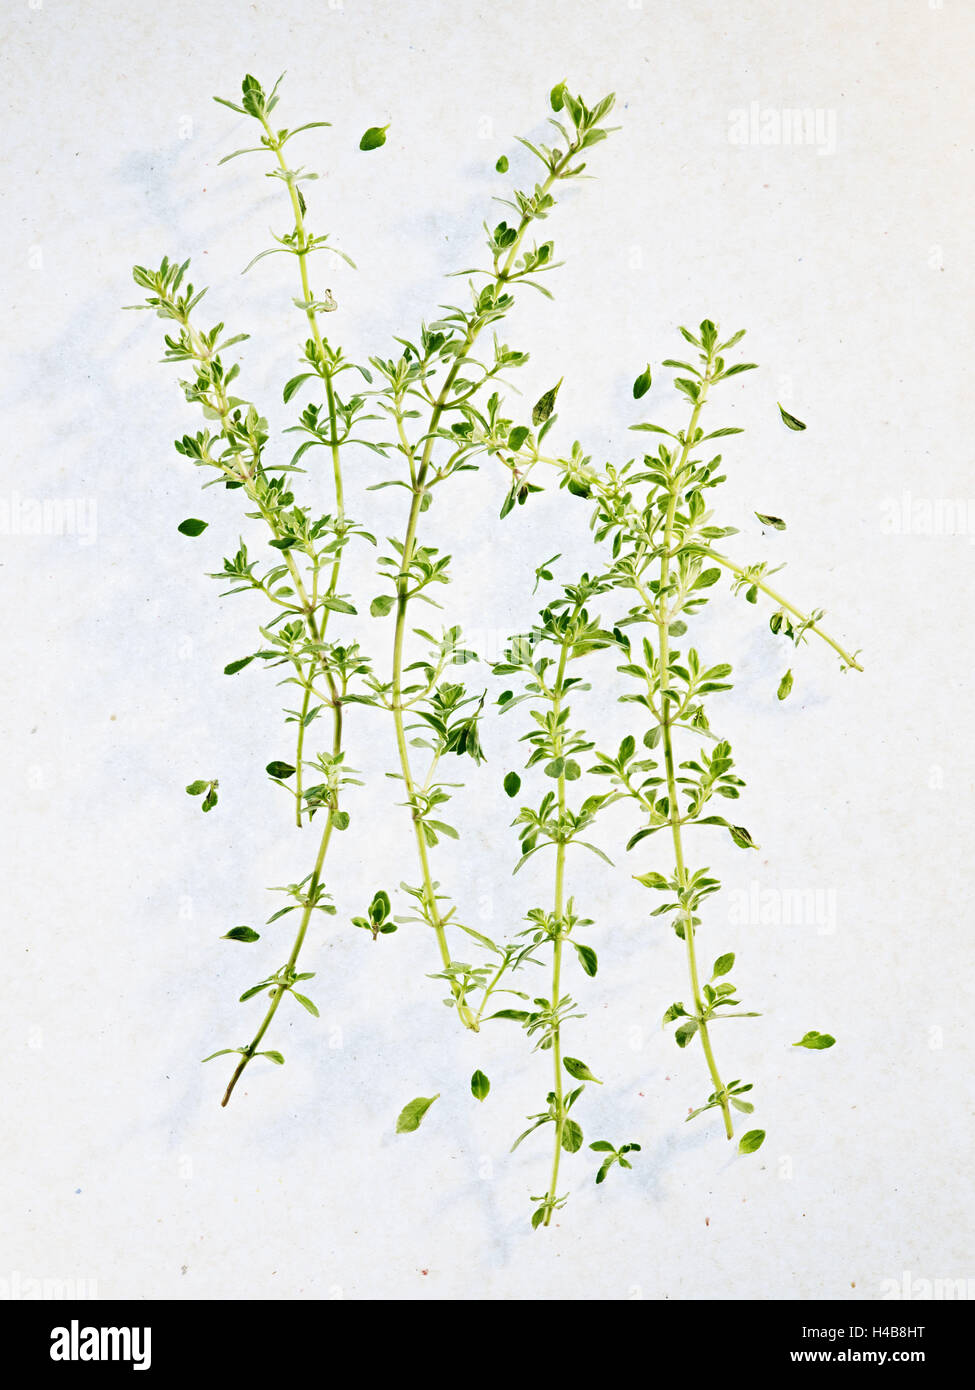 Thyme, Thymus vulgare, twigs, leaves, green, Stock Photo